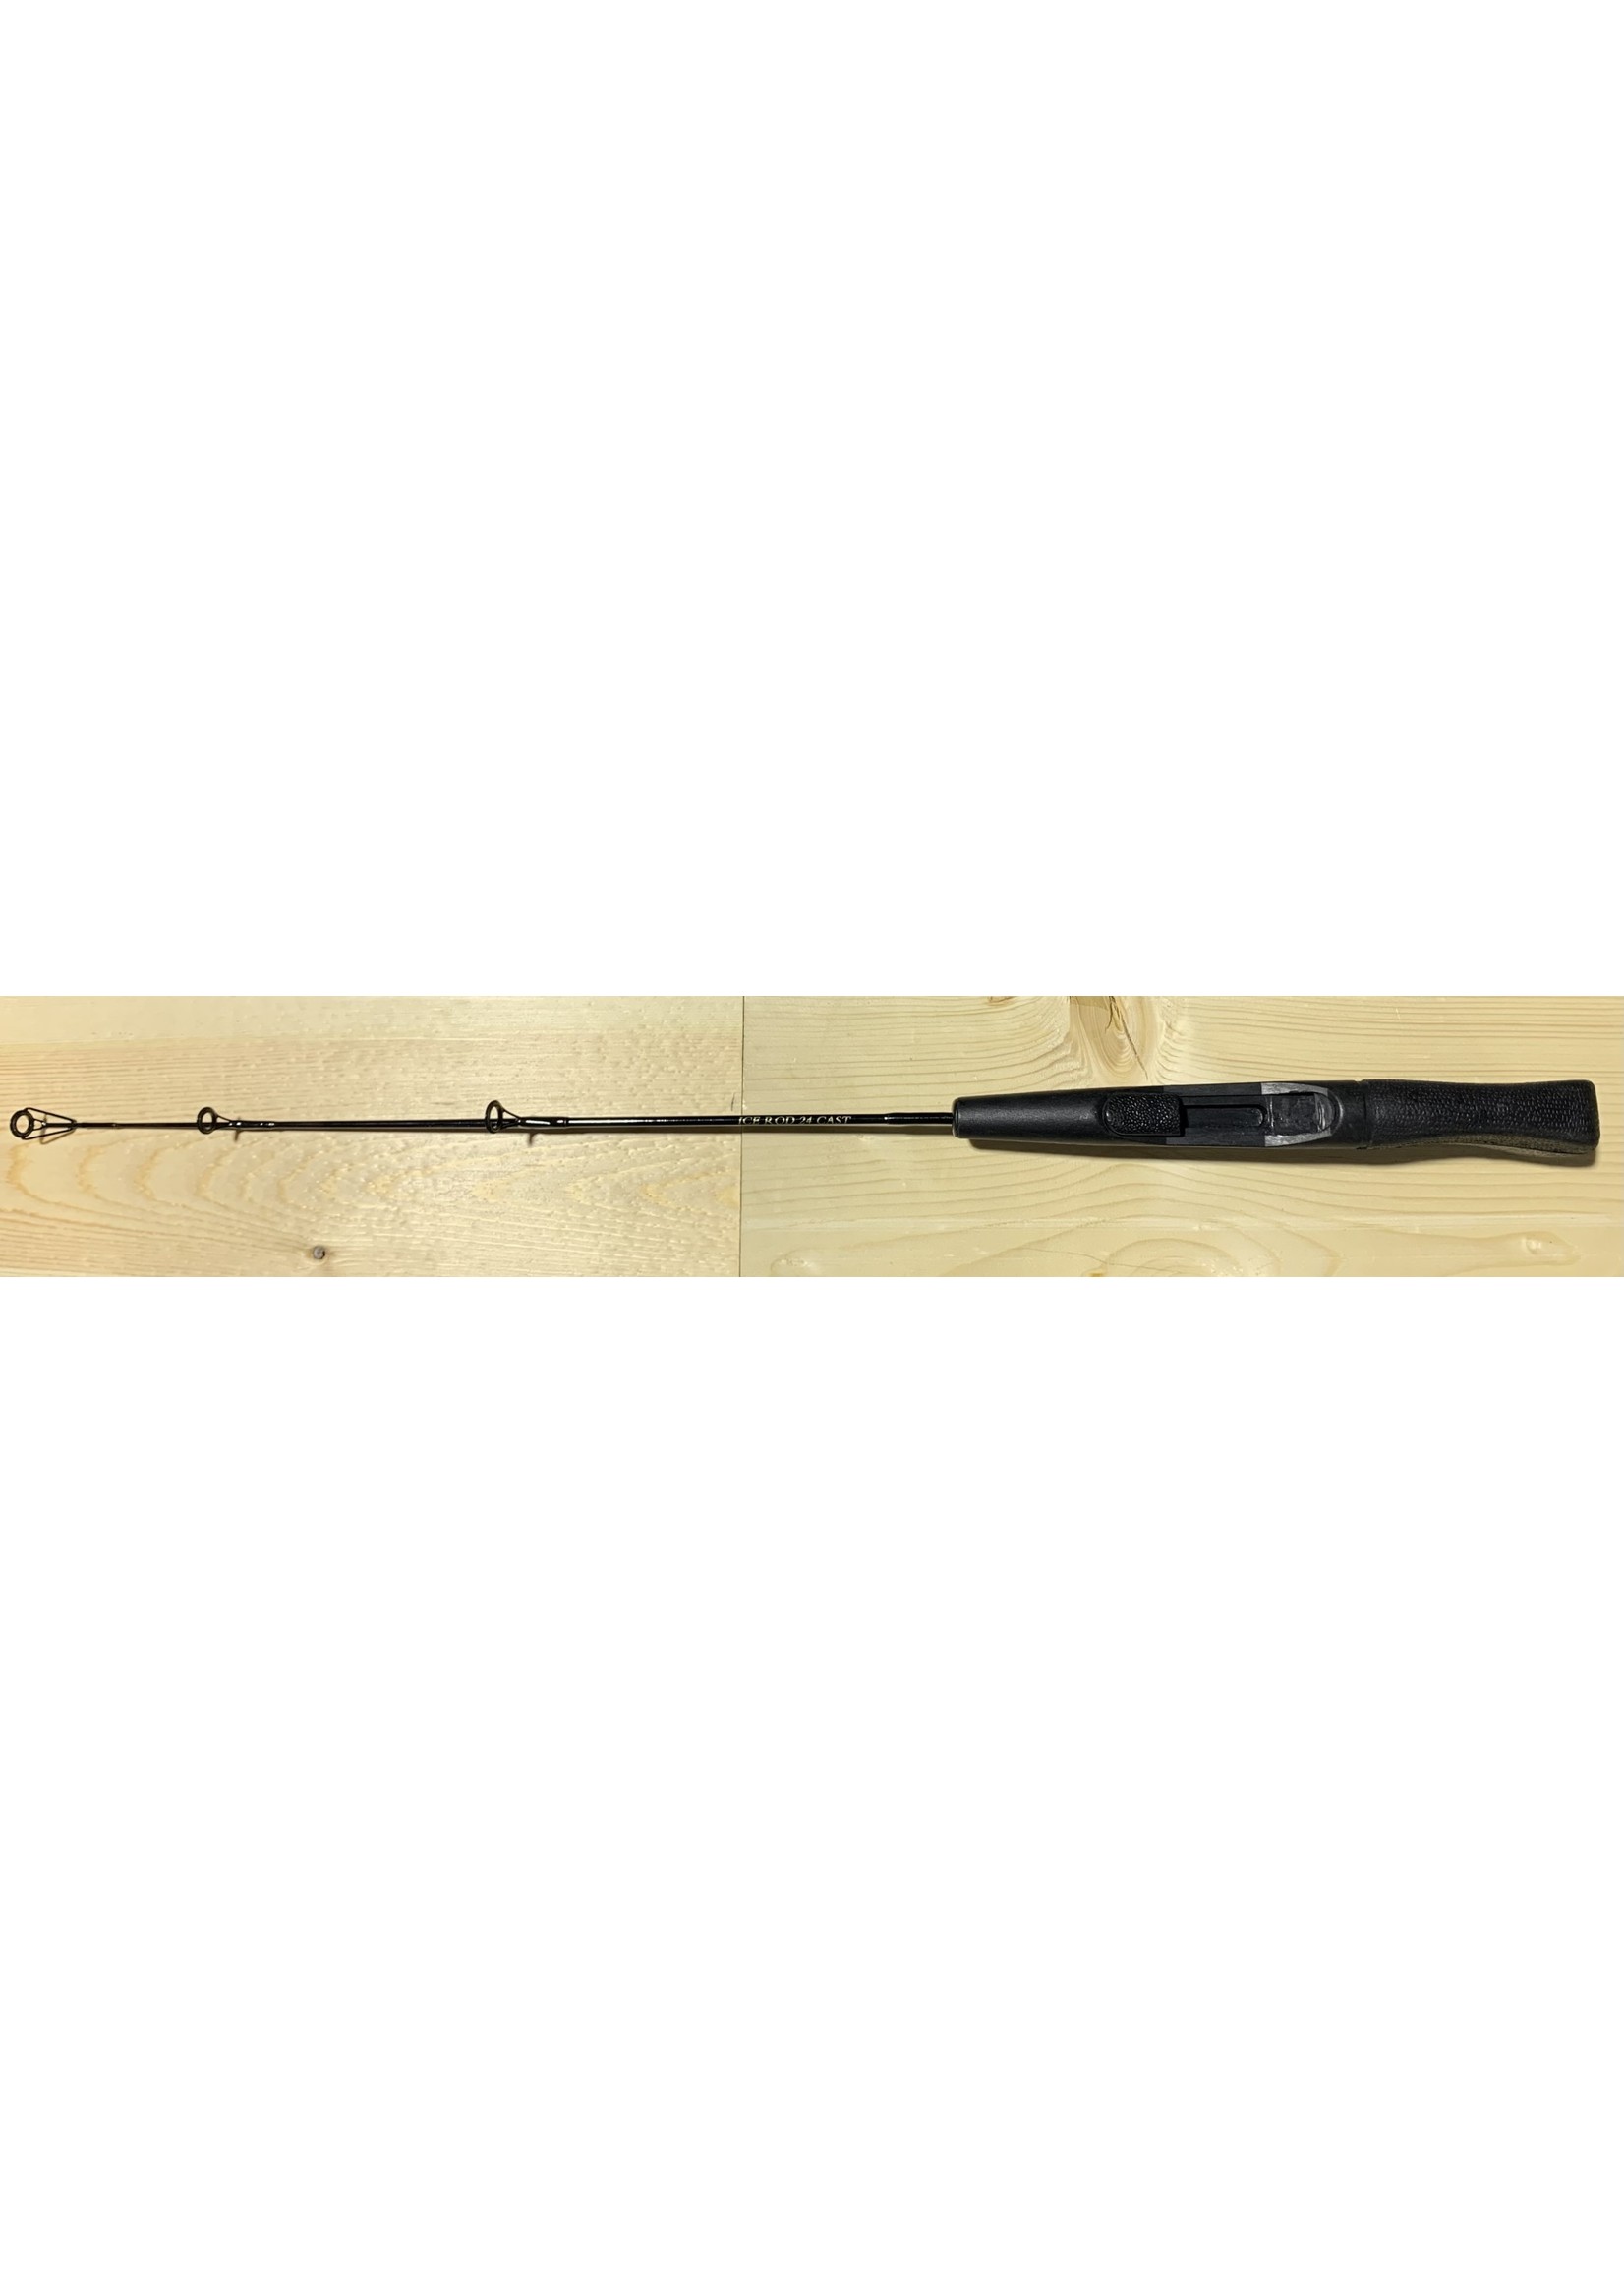 BELL OUTDOOR PRODUCTS BELL ICE ROD CAST  COMBO 24" MED WONDER ROD REEL BAIT CAST ST7RL